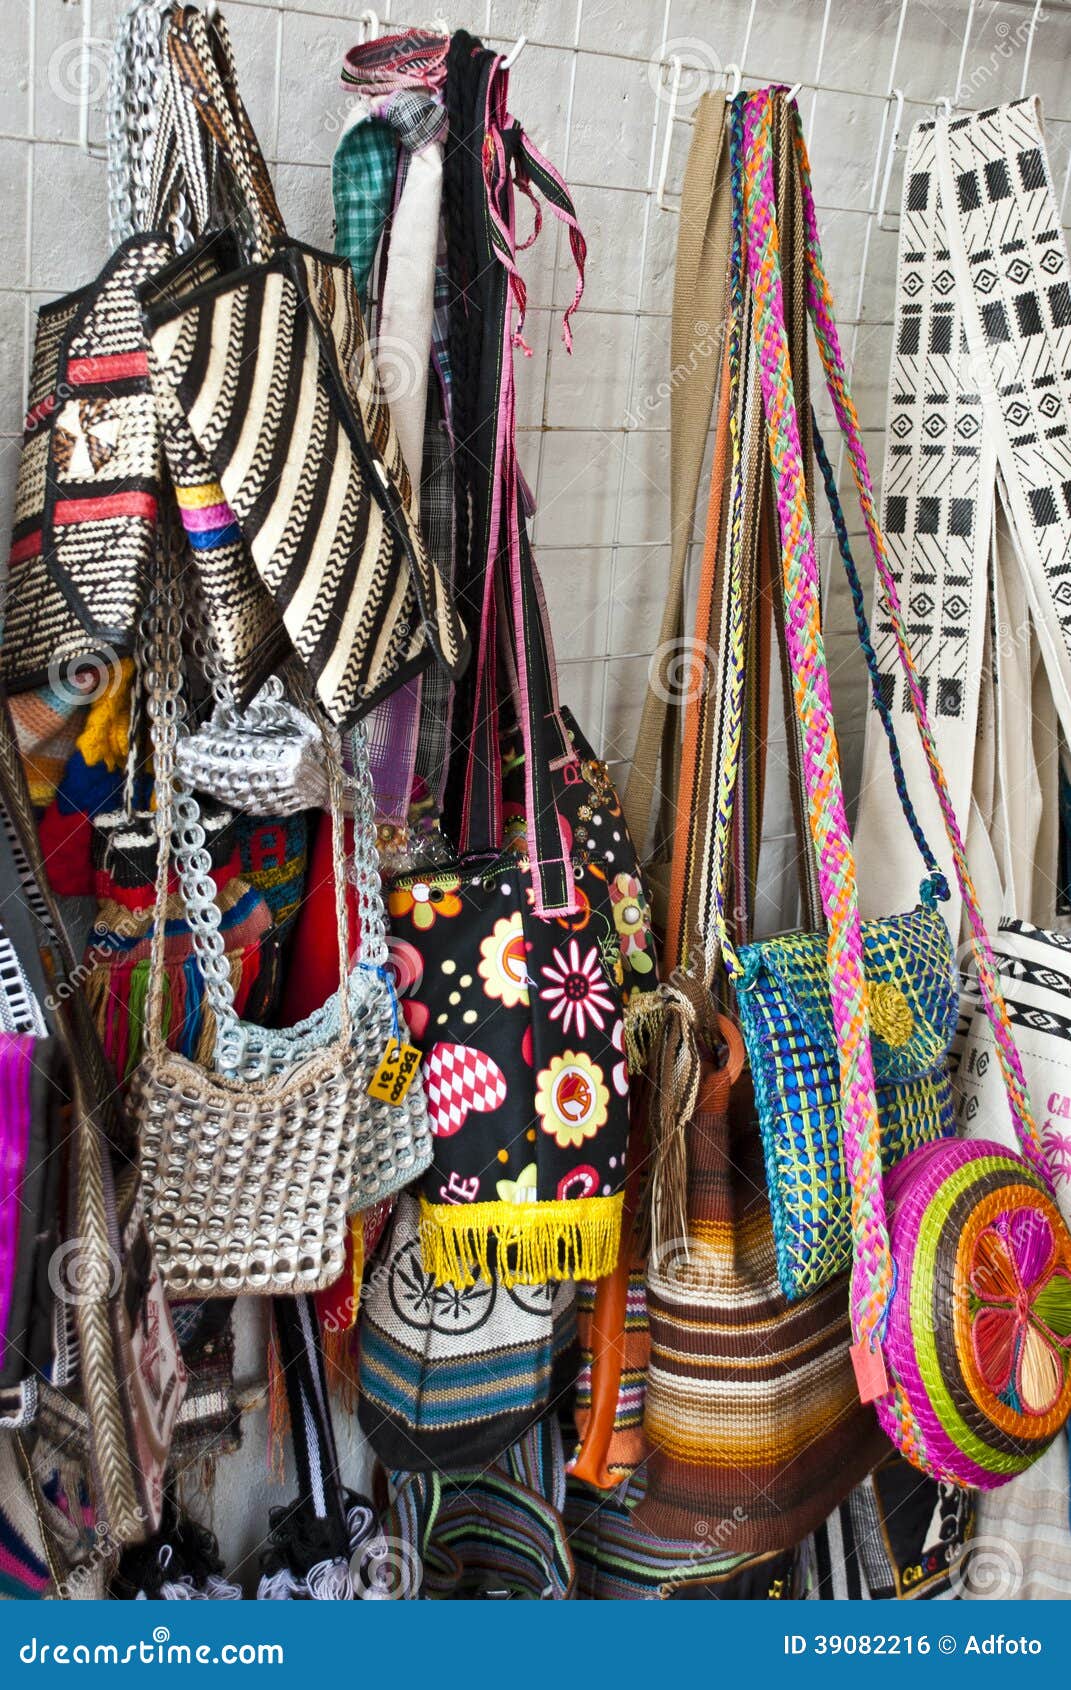 2,000 Colombian Bag Royalty-Free Photos and Stock Images | Shutterstock